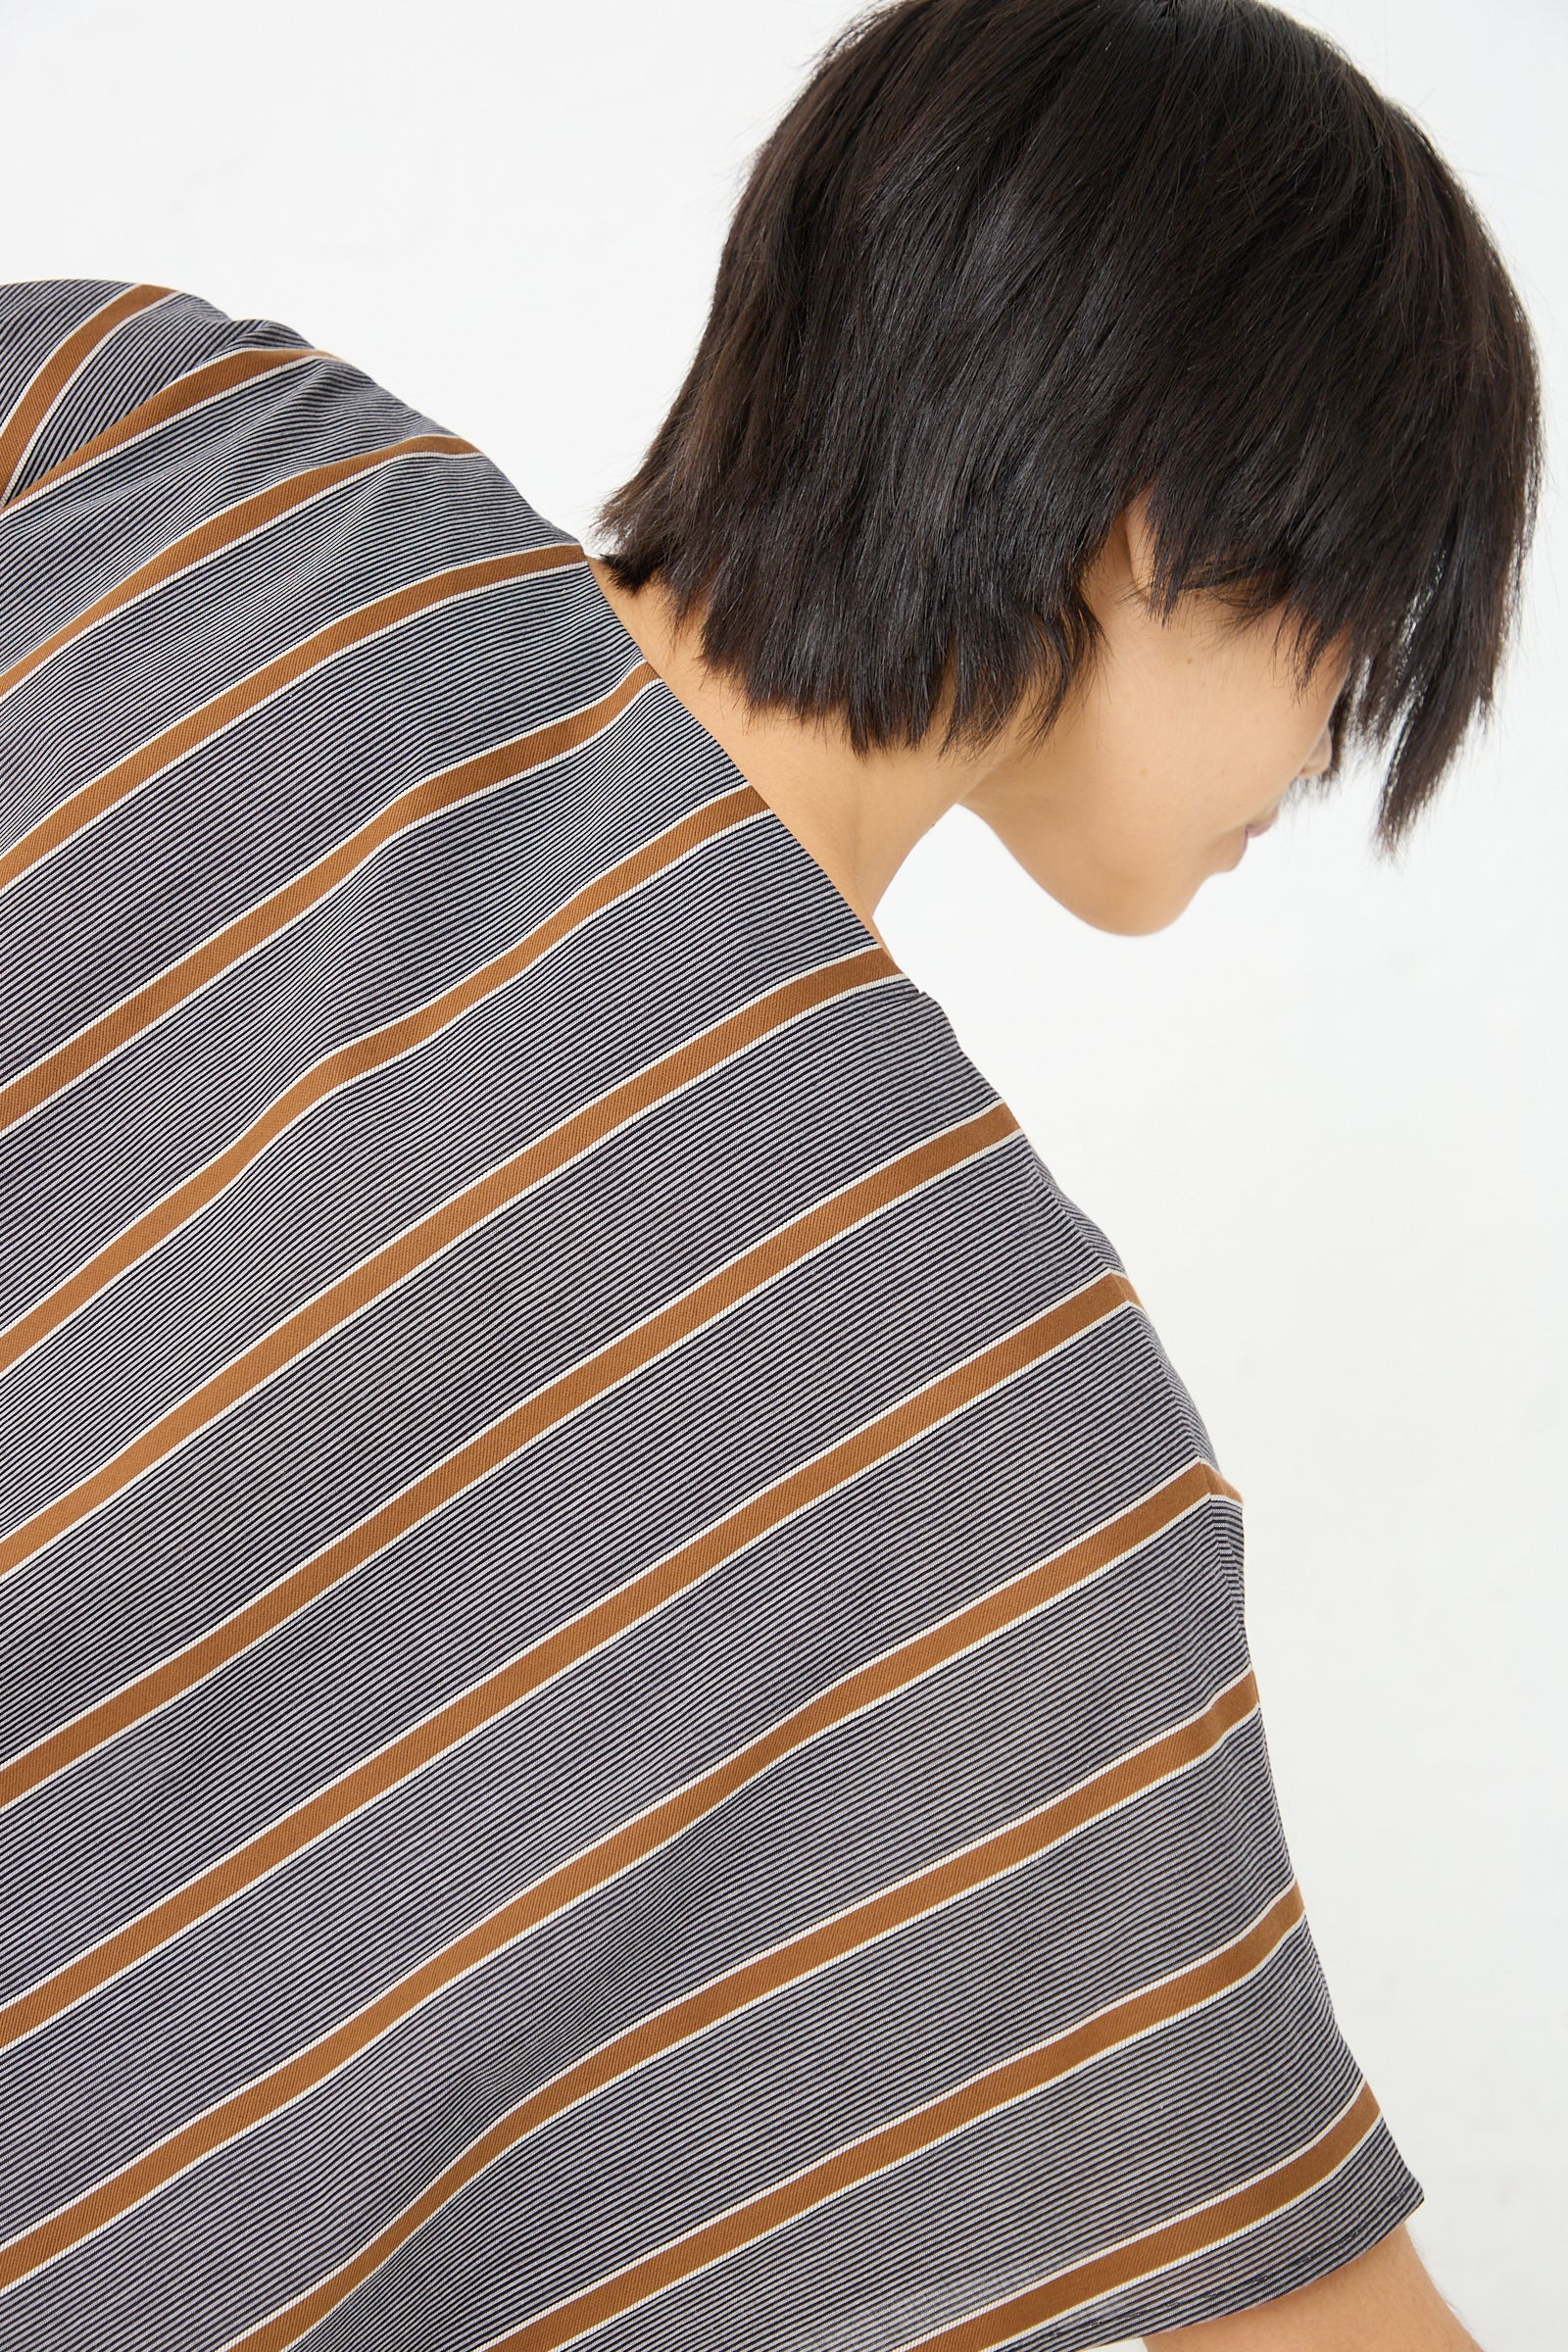 The back of a woman wearing an oversized Cristaseya Cotton Caftan in Striped Black and Noisette, made of lightweight Japanese cotton.